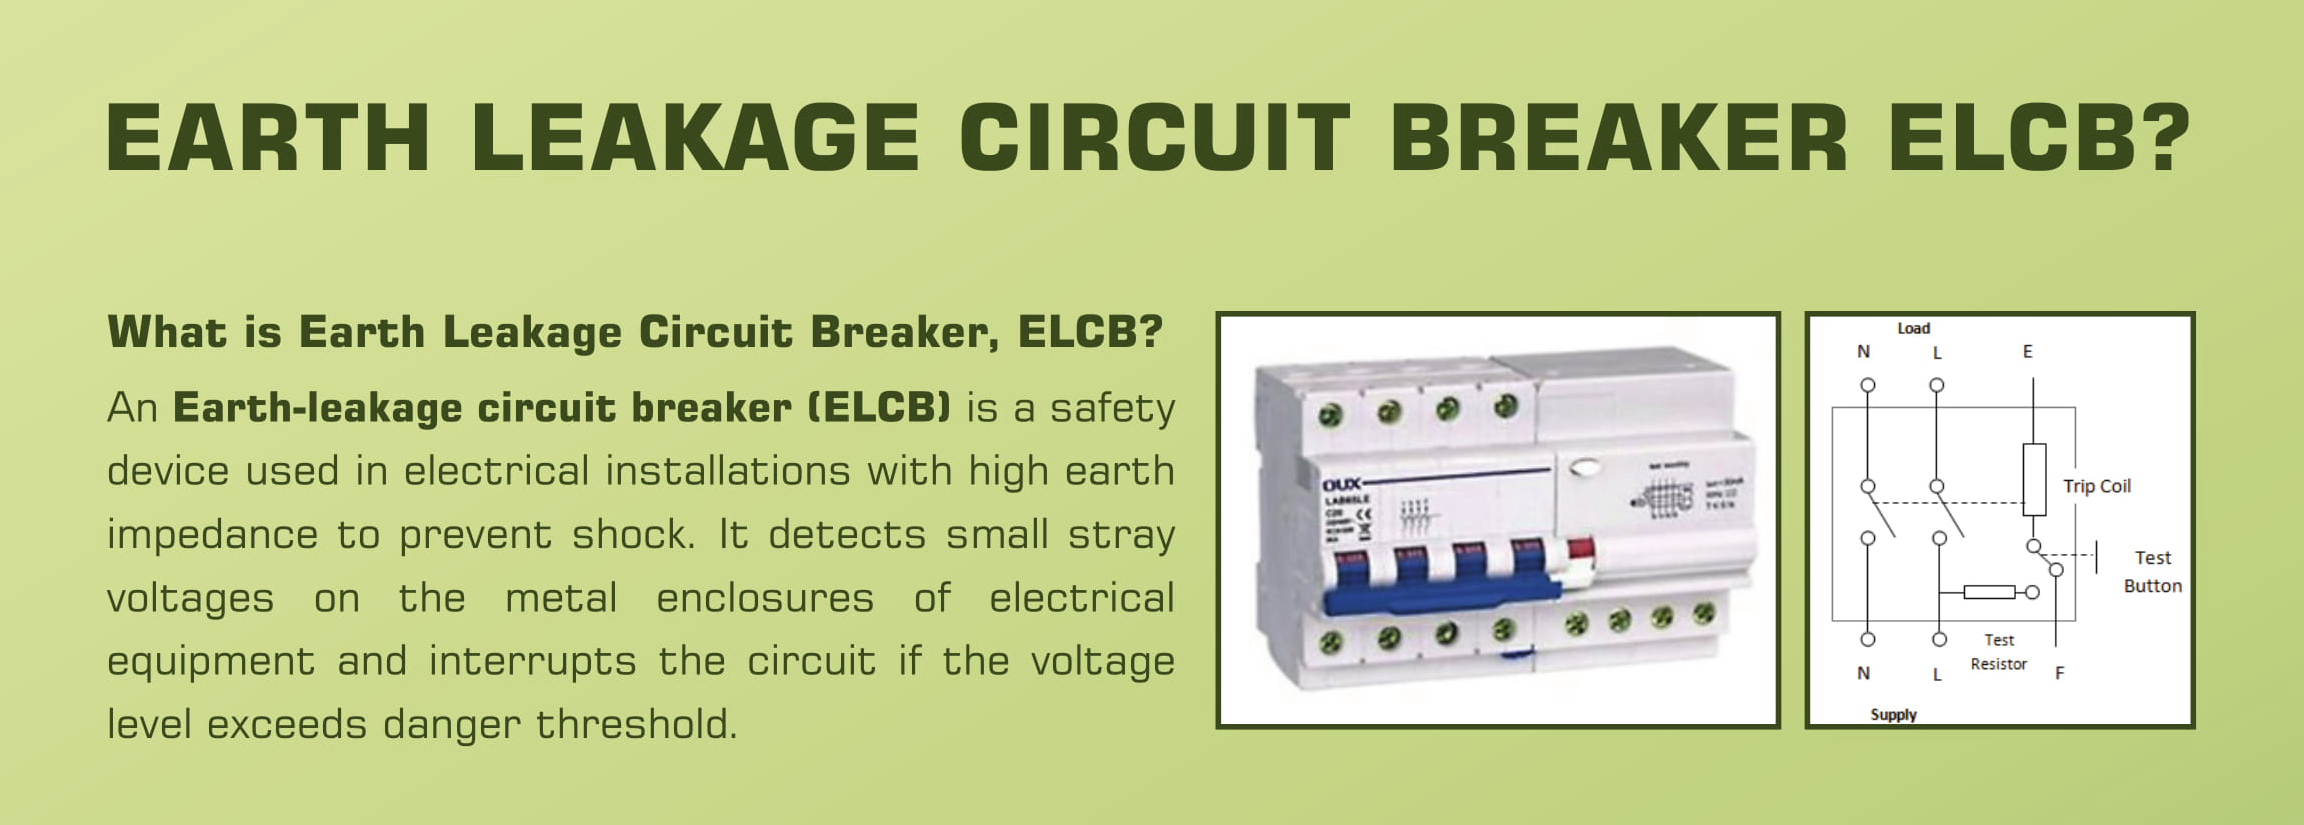 earth leakage circuit breaker in low voltage distribution system